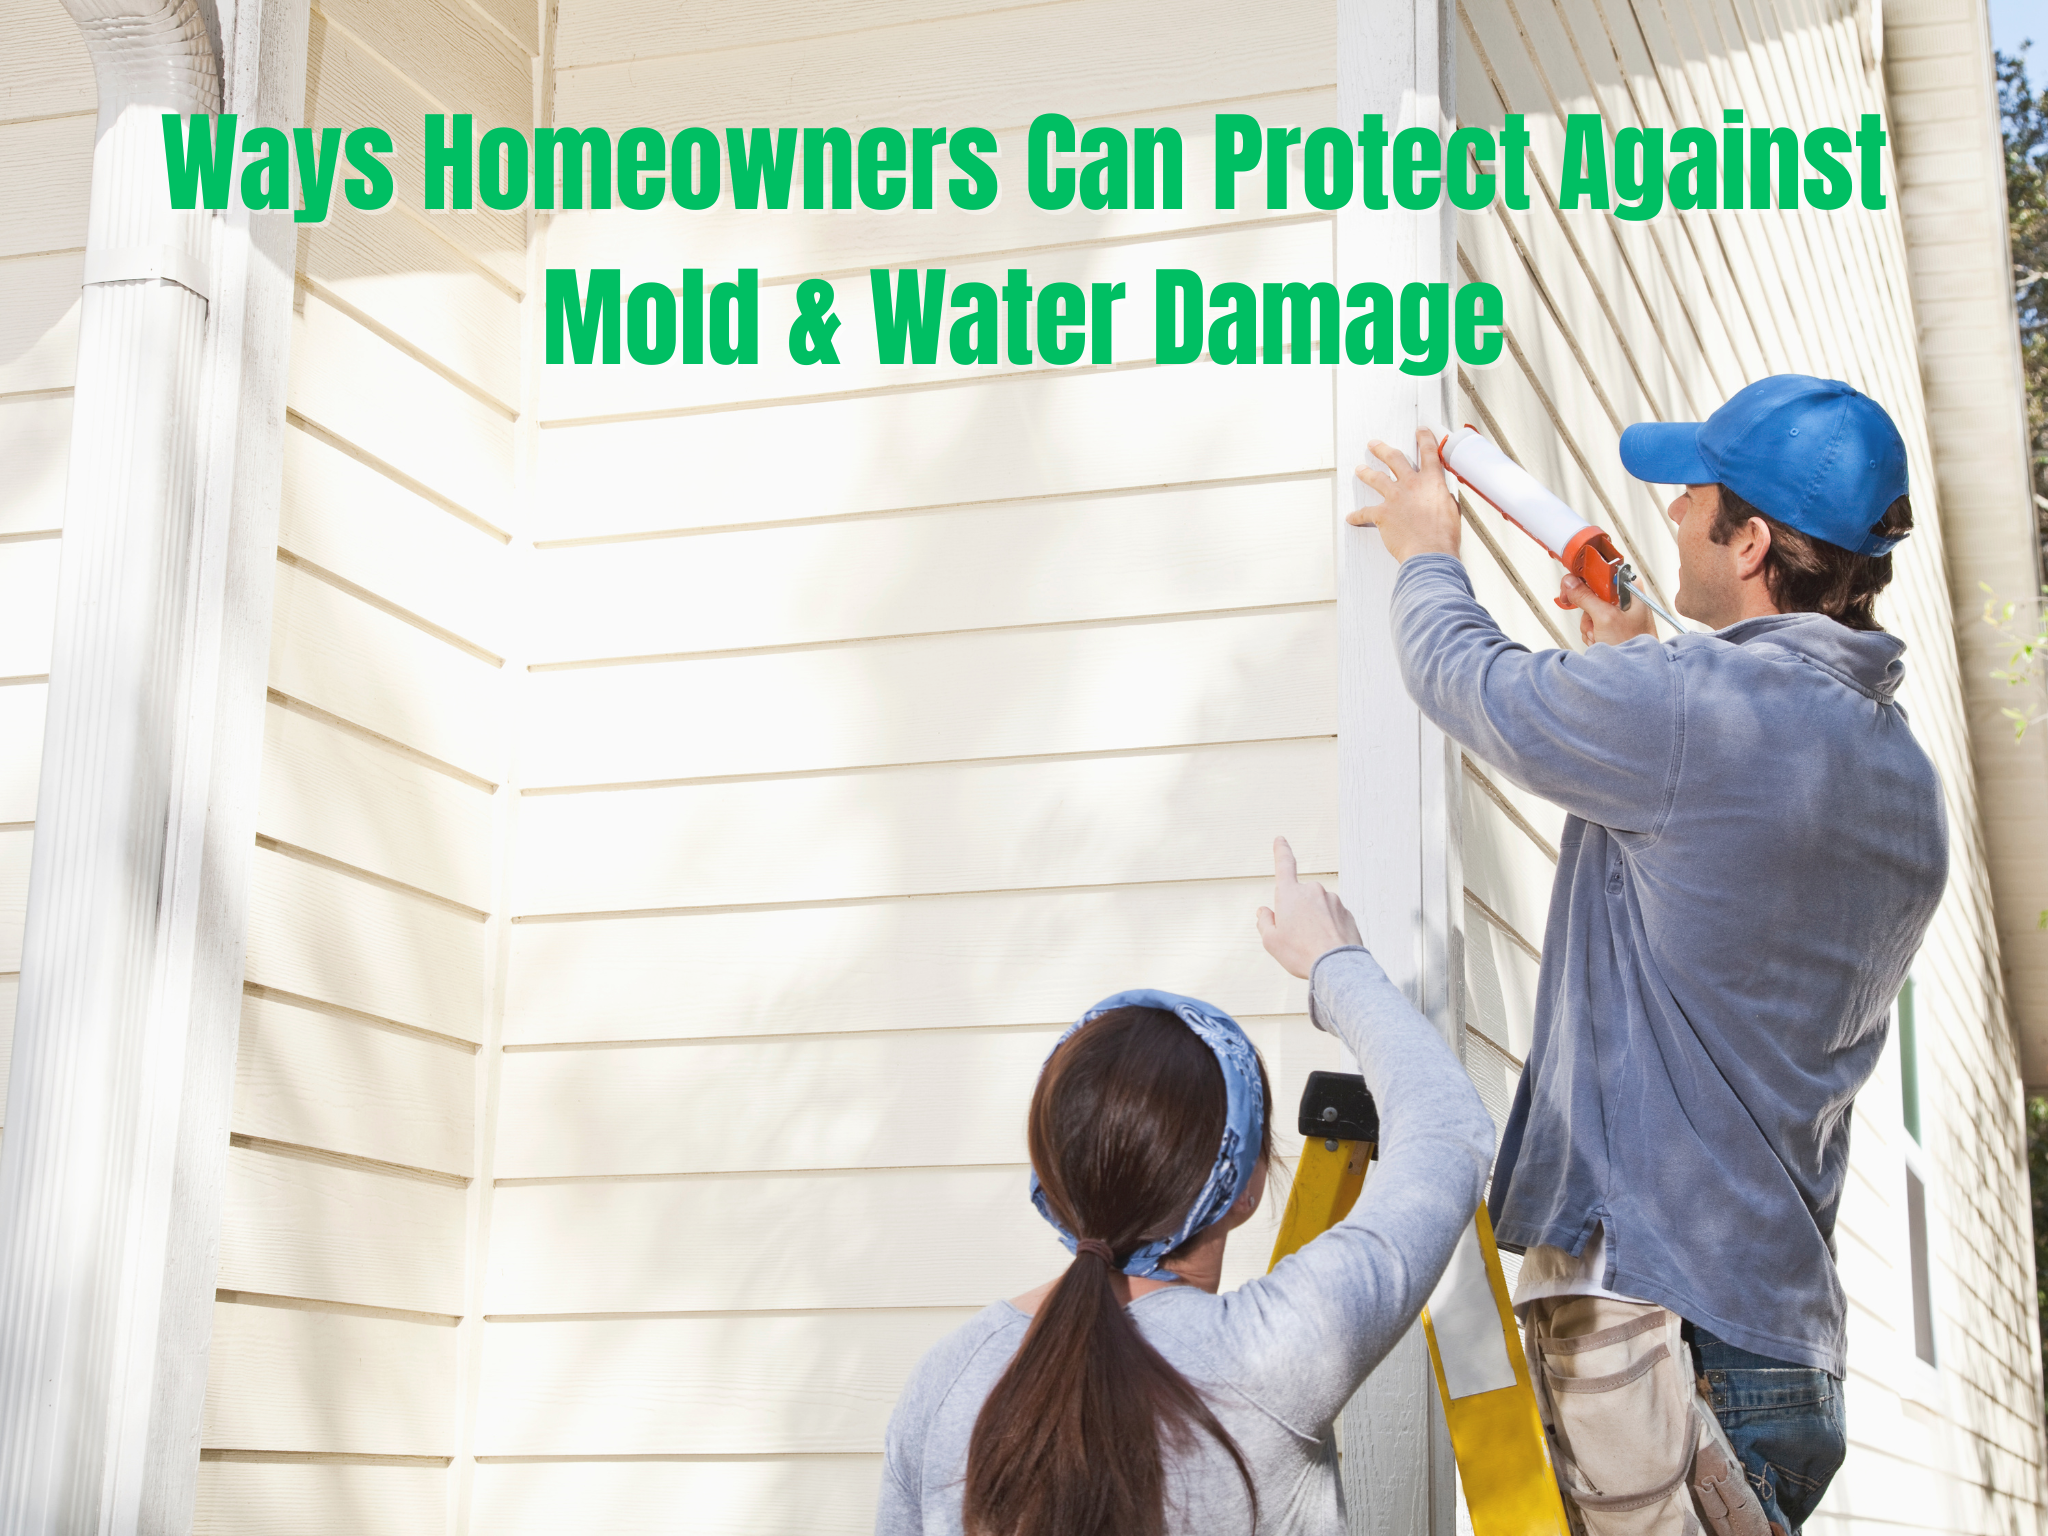 Ways Homeowners Can Protect Against Mold & Water Damage